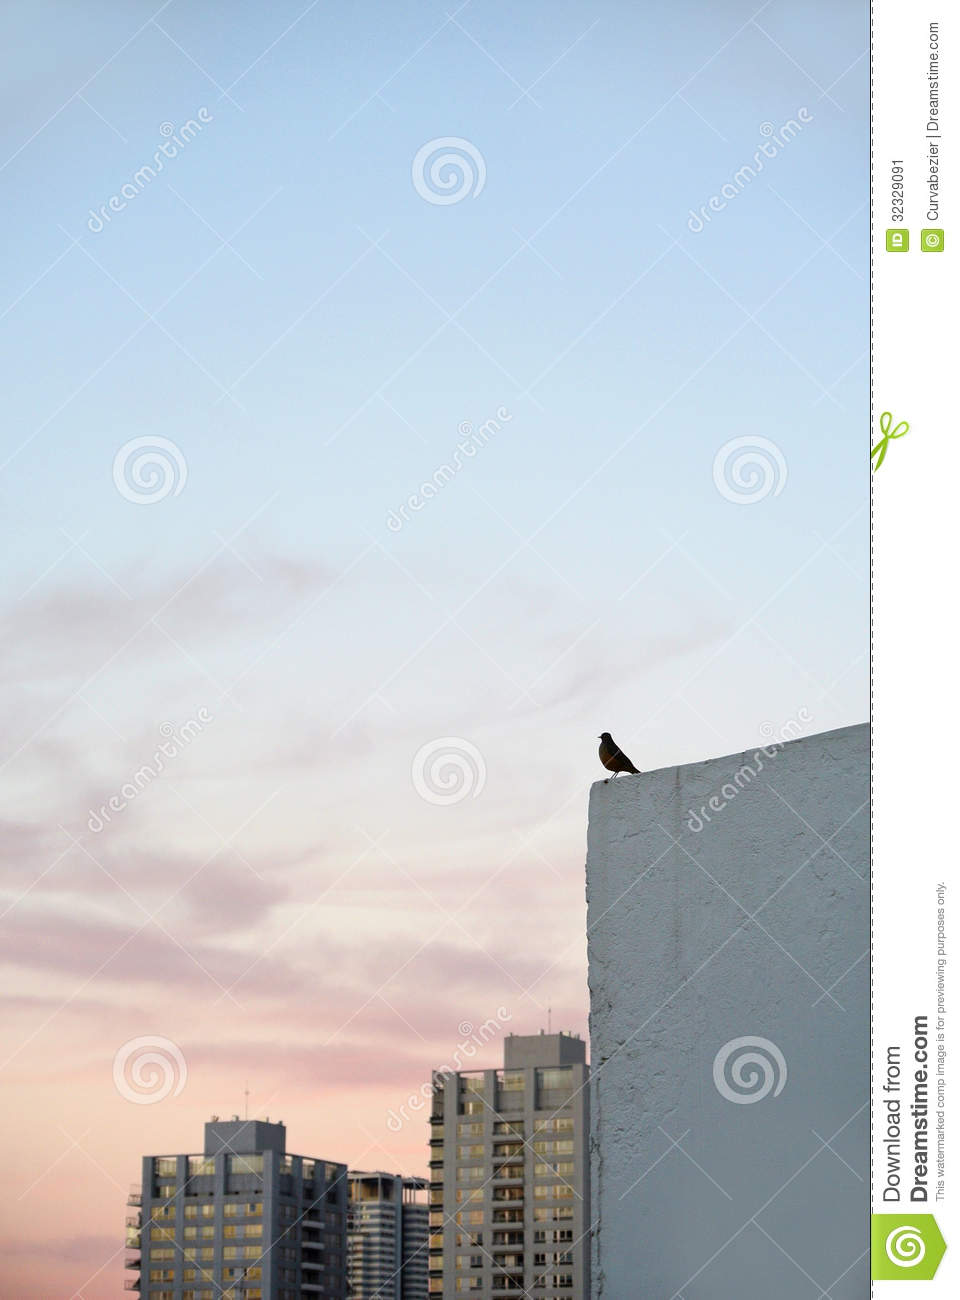 Small Bird Standing On A Building Ledge Stock Image   Image  32329091